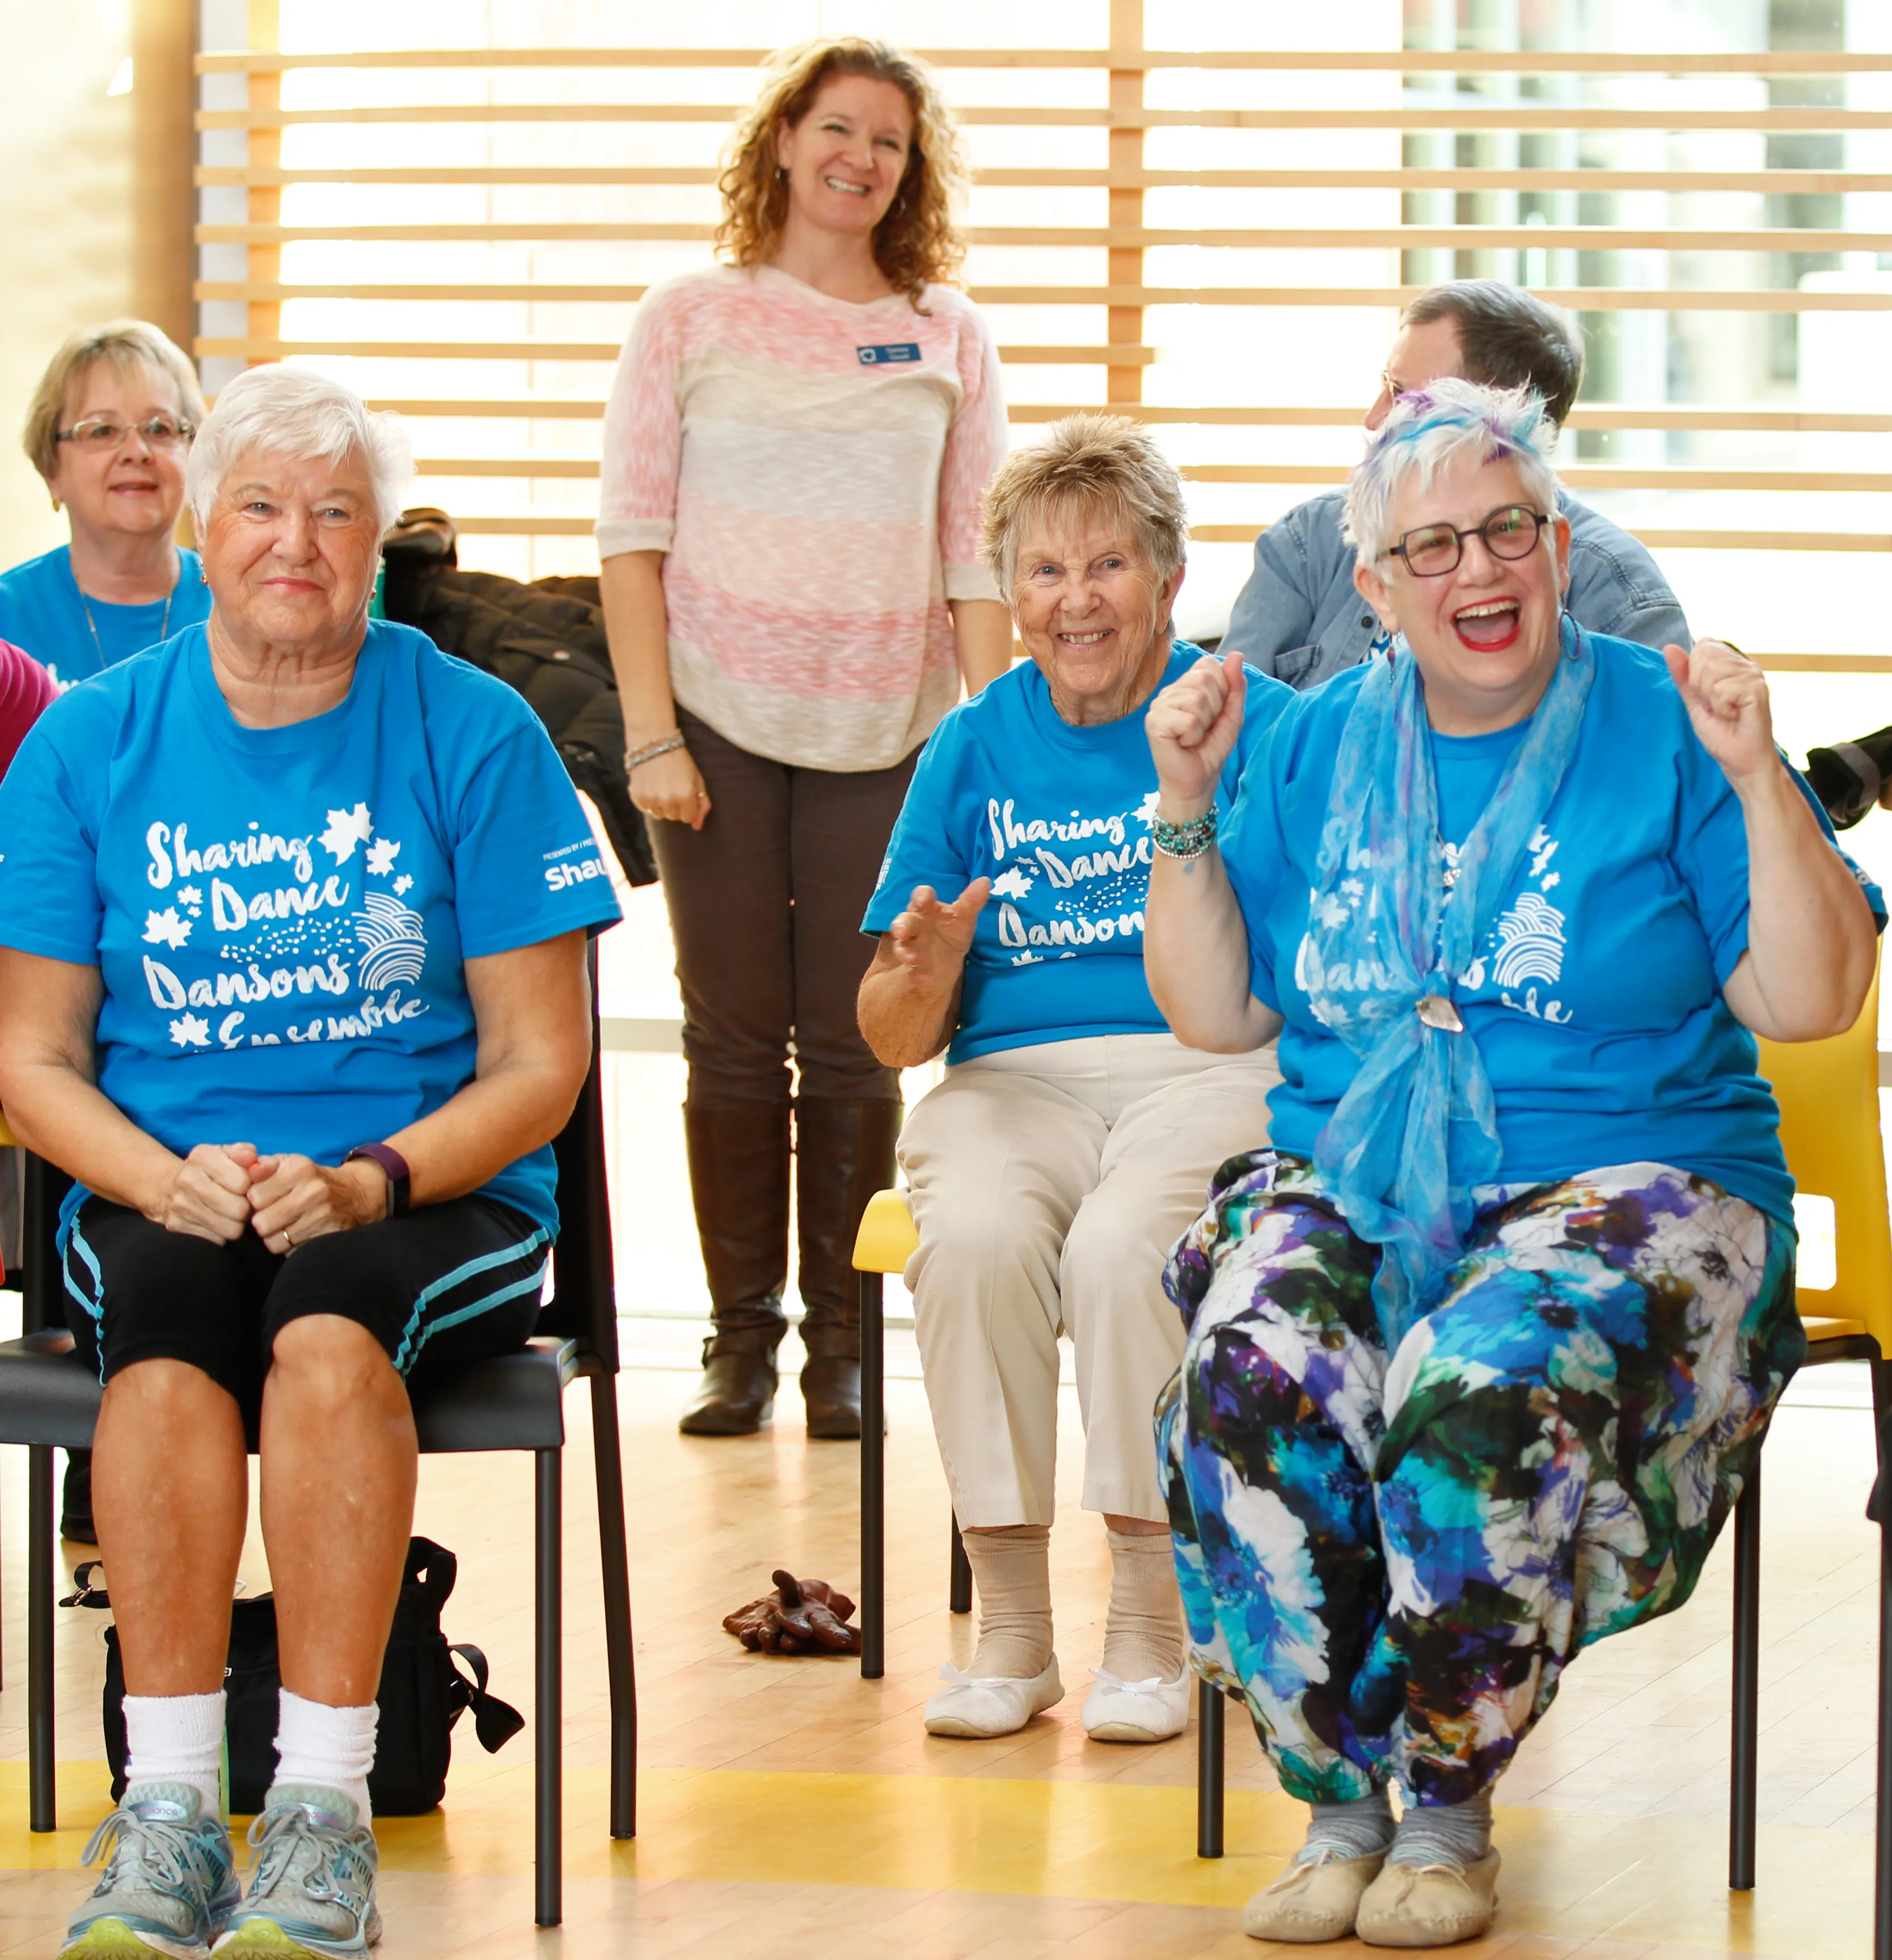 Participants in Sharing Dance Older Adults classes 